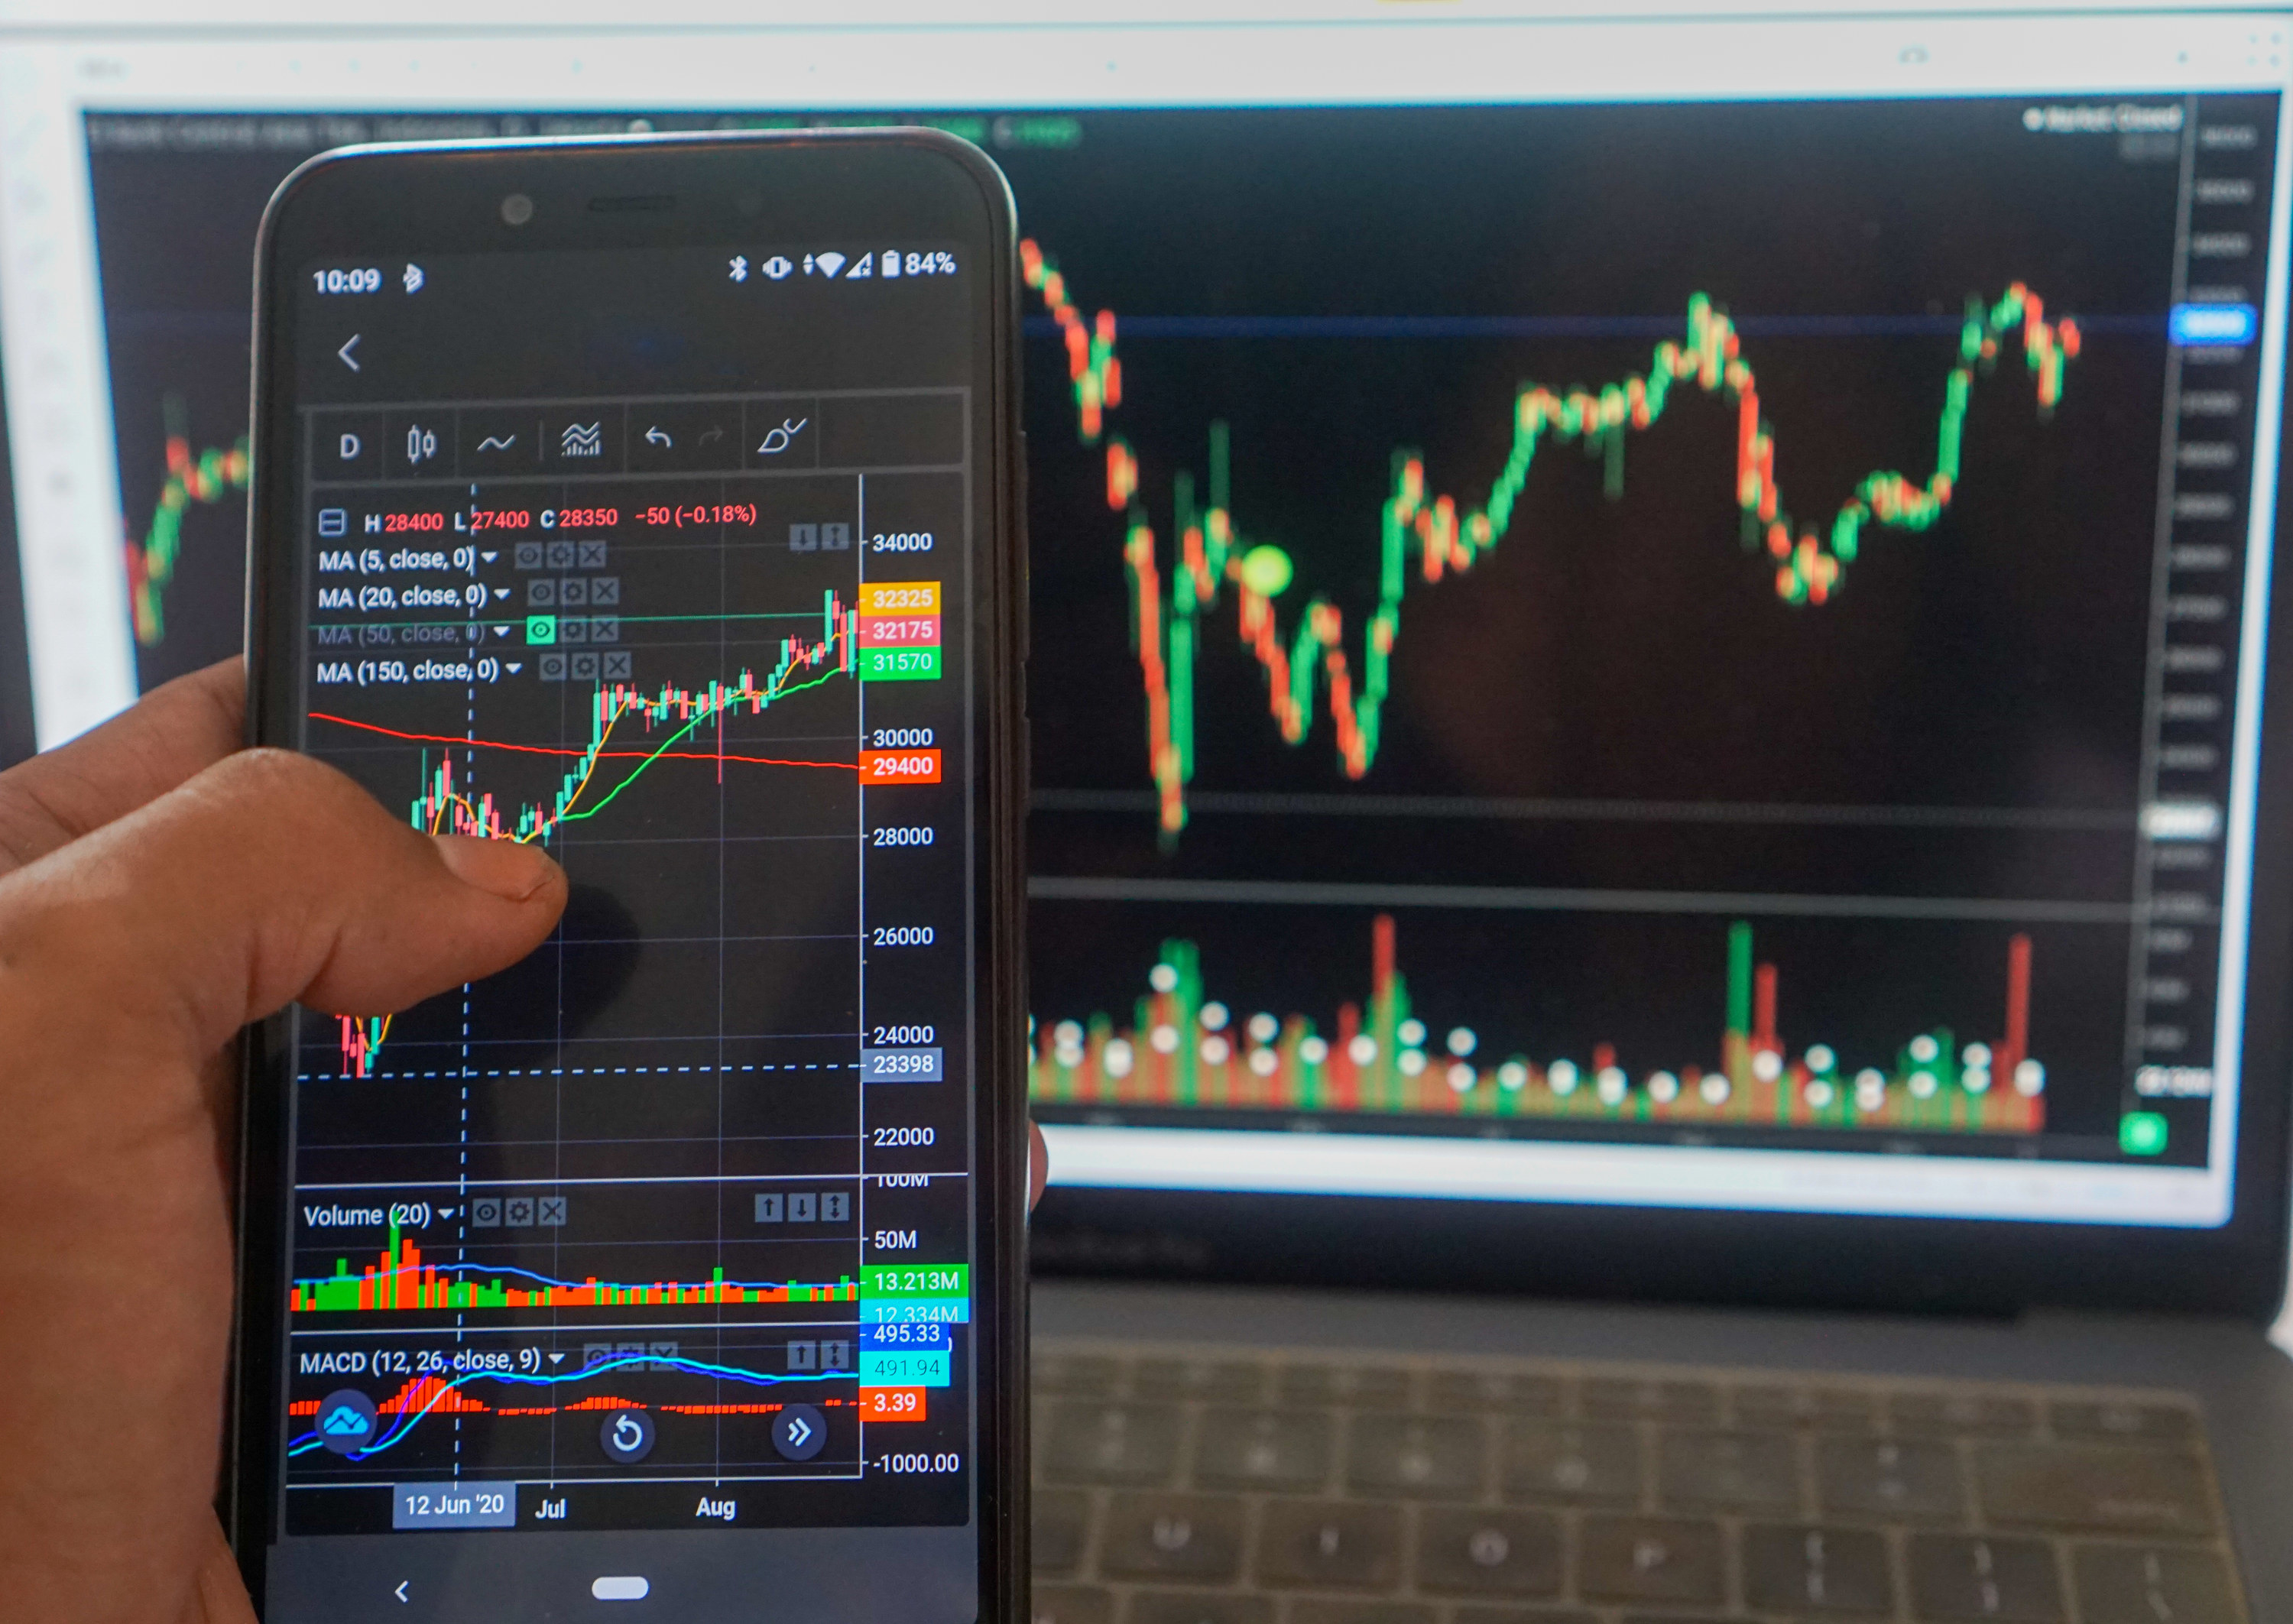 Hand holding a phone with a stock ticker on screen